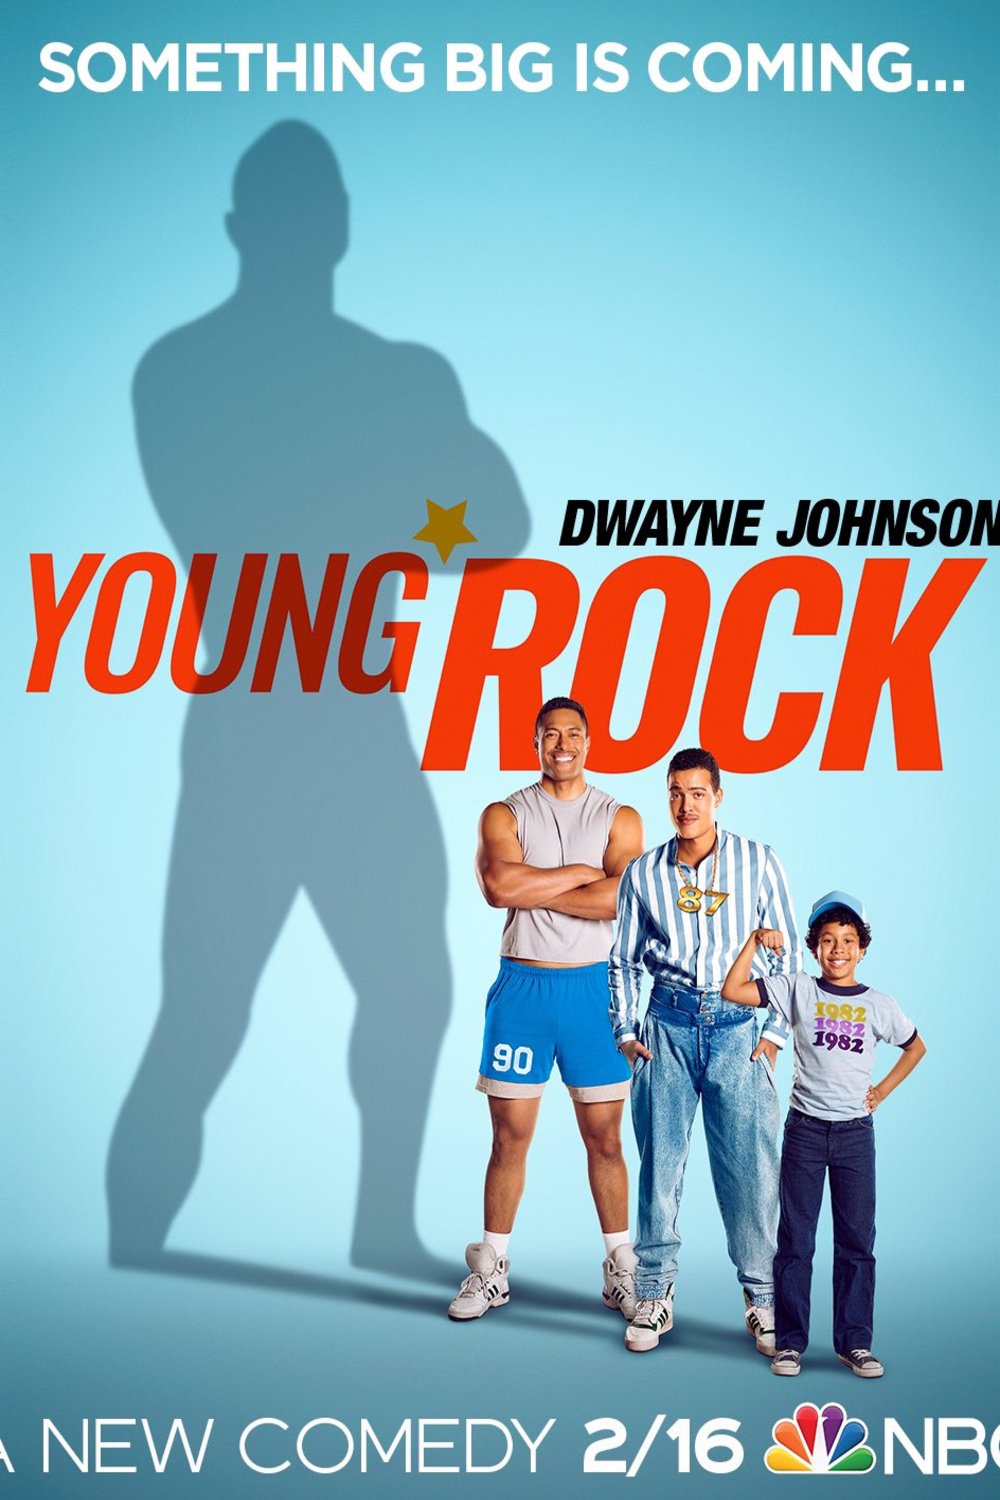 Poster of the movie Young Rock